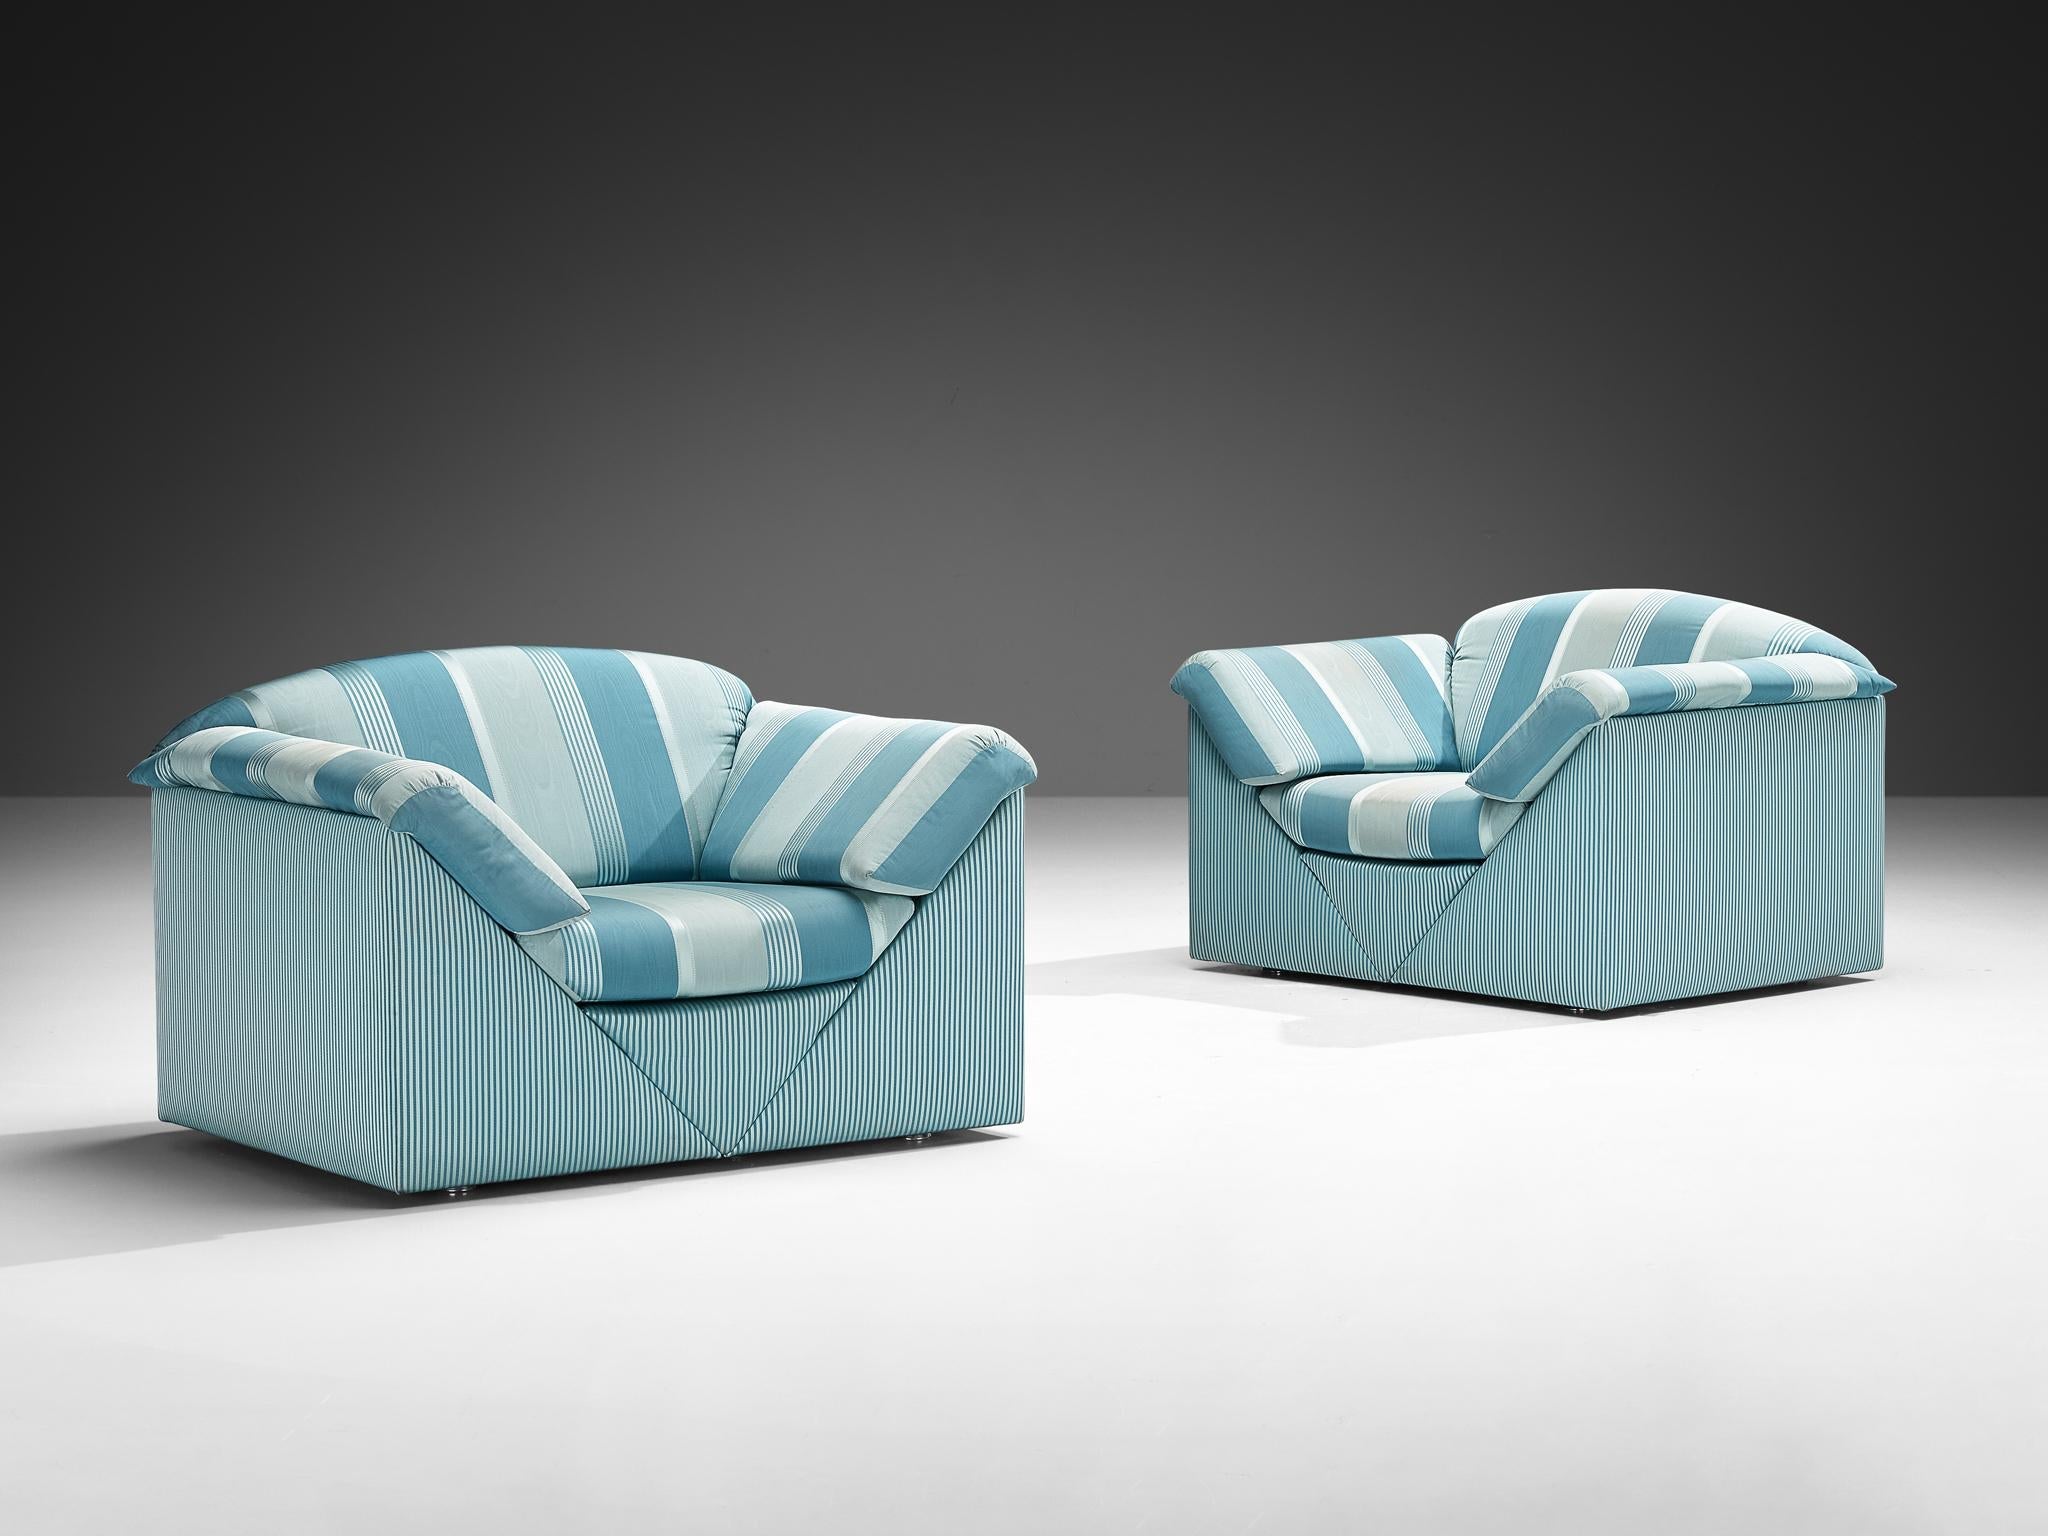 Substantial Lounge Chairs in Delicate Striped Green Blue Upholstery